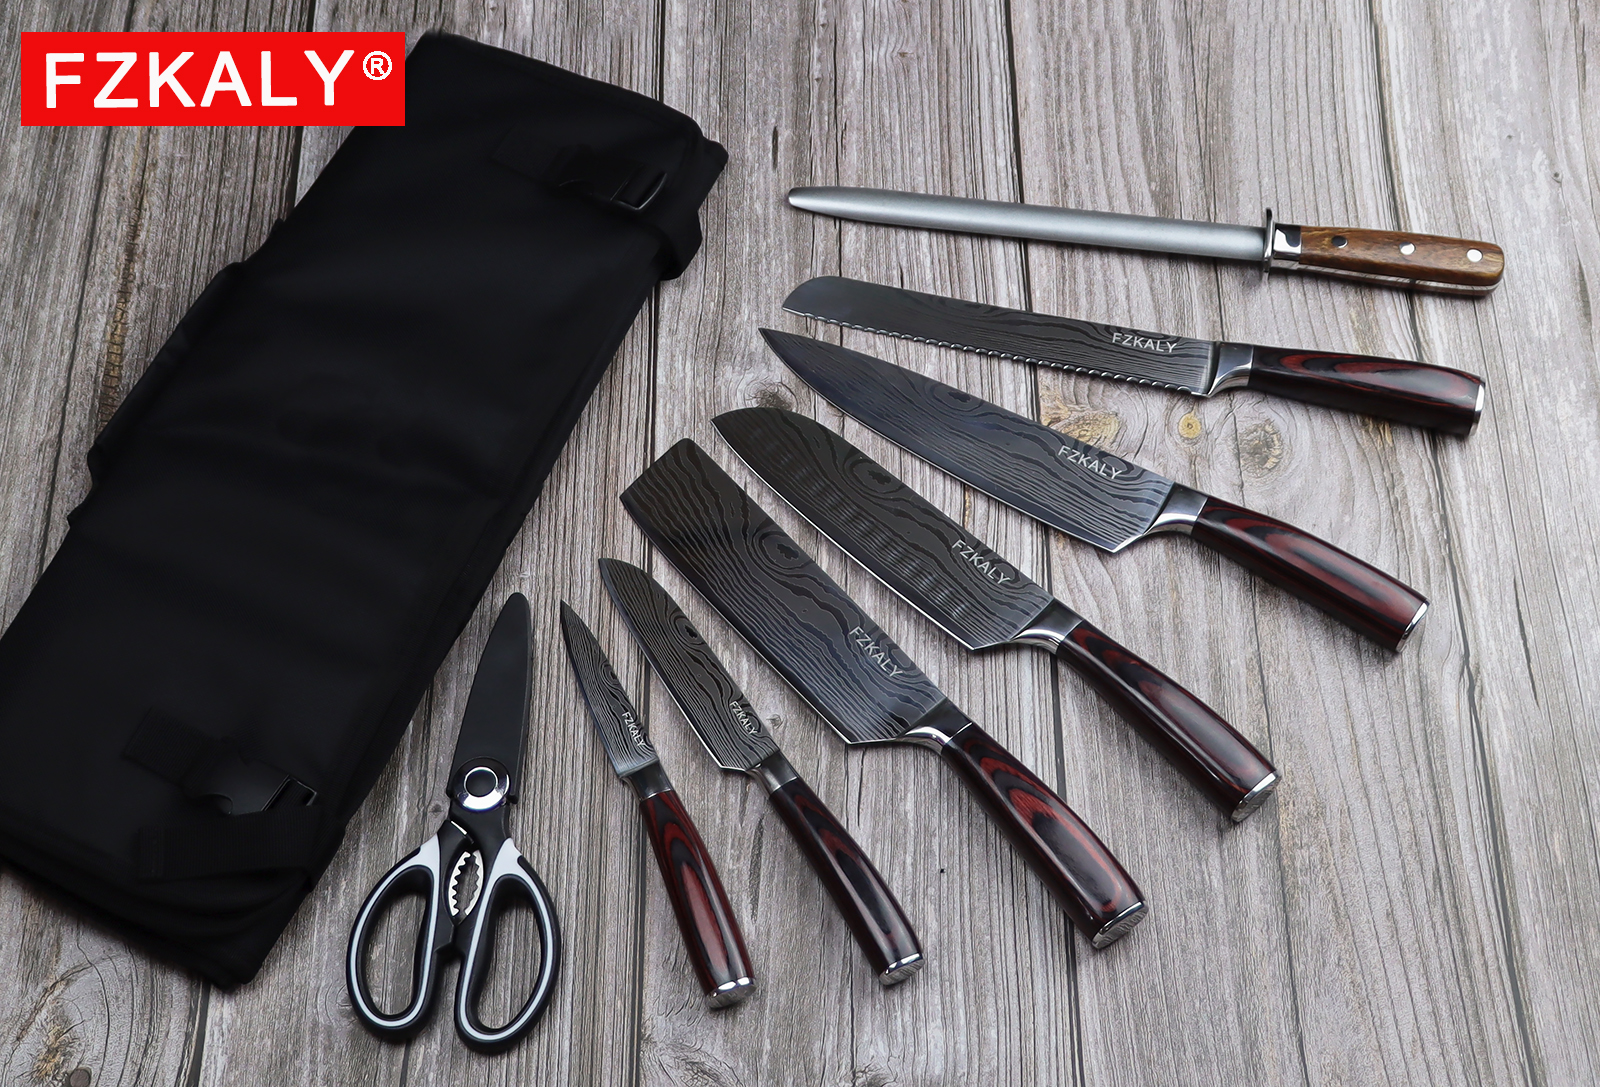 Professional 9 Piece Roll Knife Set,BBQ Knife Set,Knife Roll,Japanese Style  Premium Stainless Steel Chef Knife Set,Outdoor Camping Knife Set in One